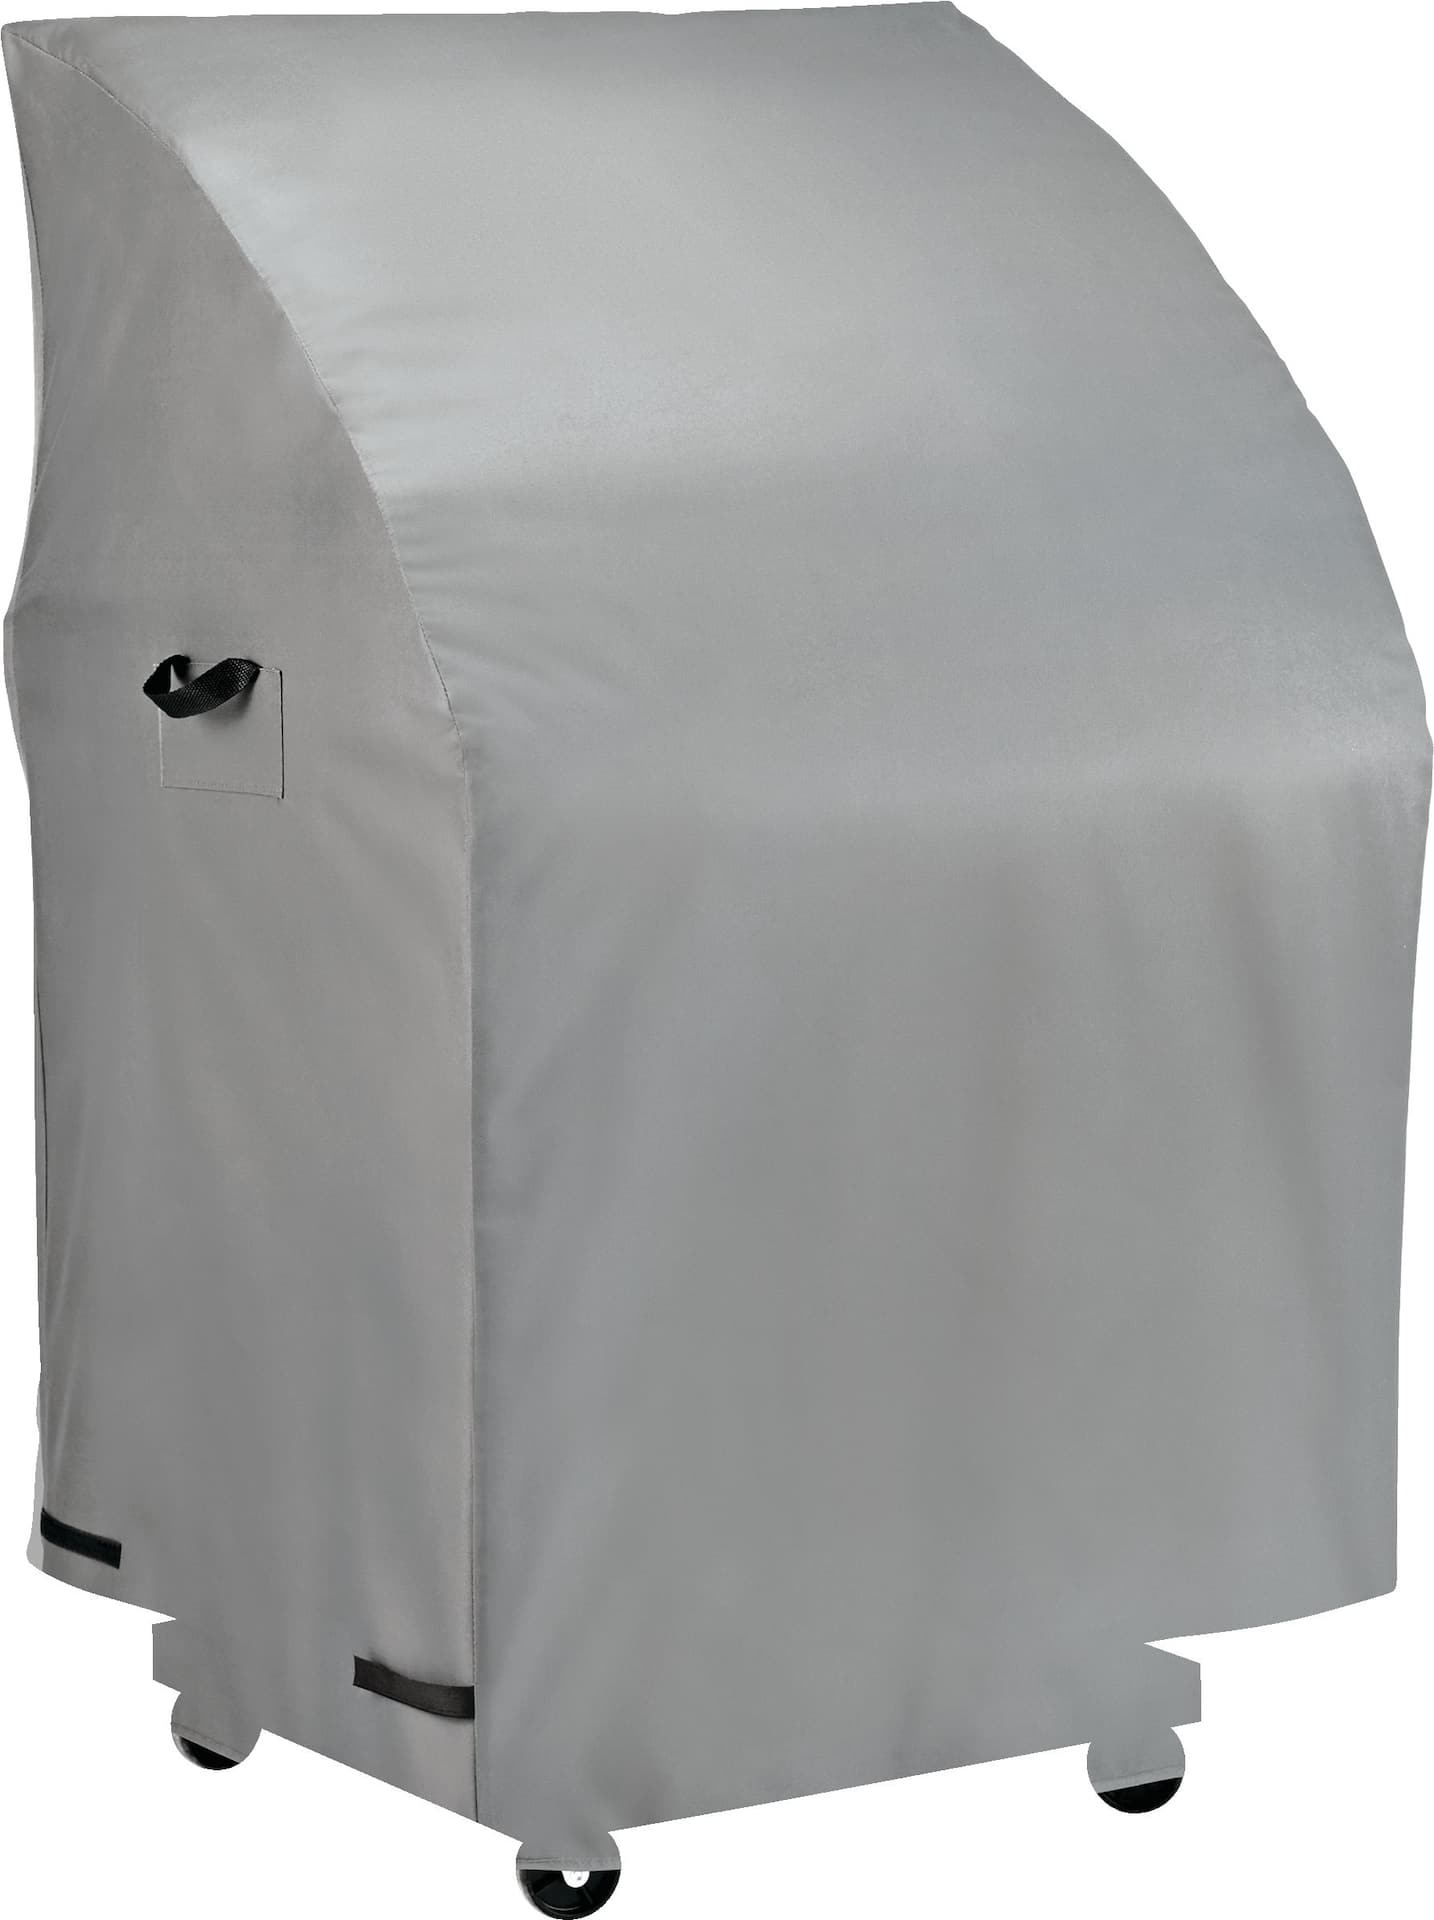 Tripel 400 Series Universal All-Weather BBQ Grill Cover, Waterproof